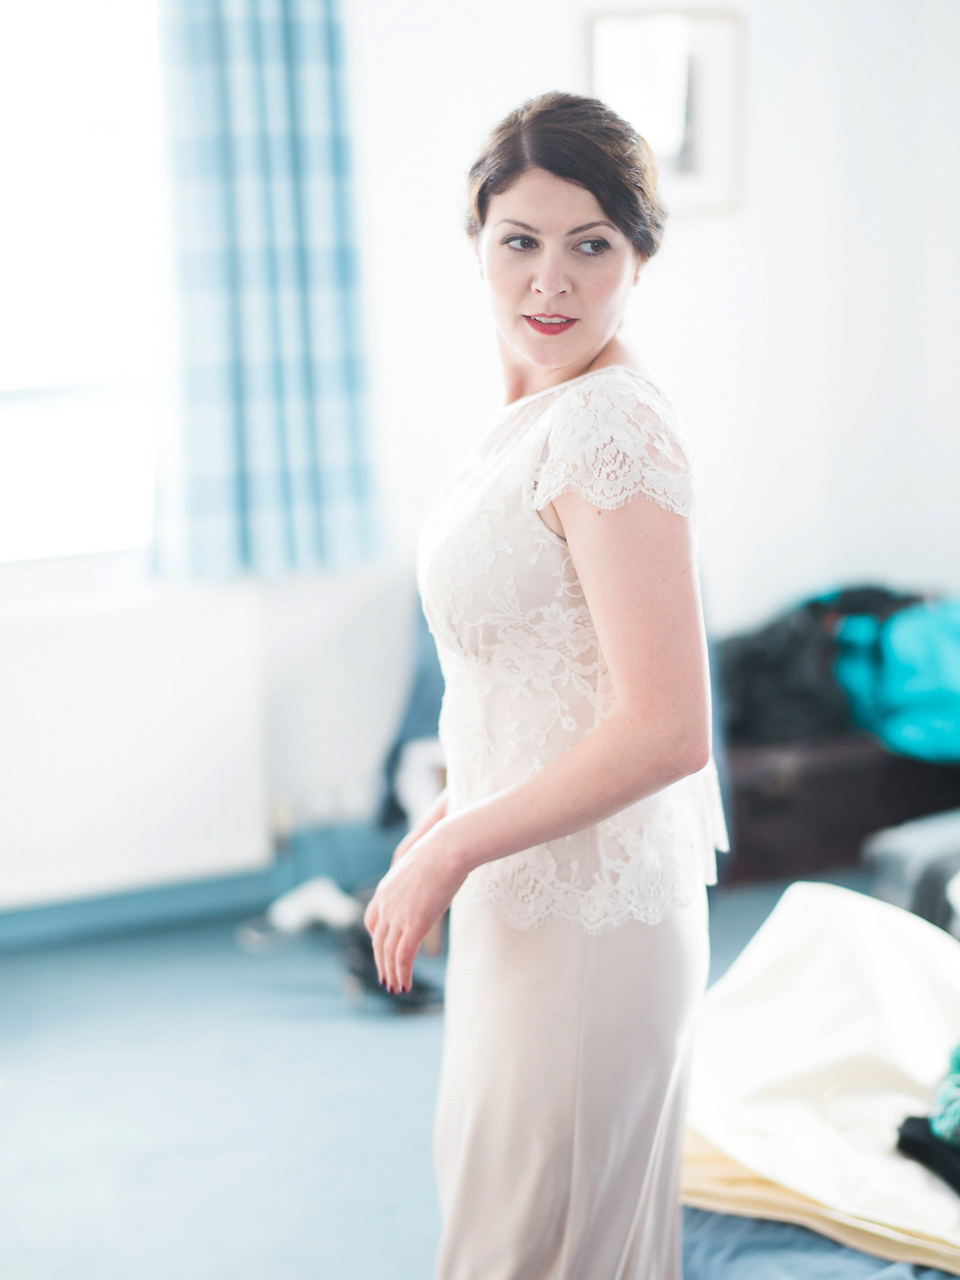 Verity wears a Halfpenny London gown for her garden party inspired wedding by the sea. Photography by John Barwood.